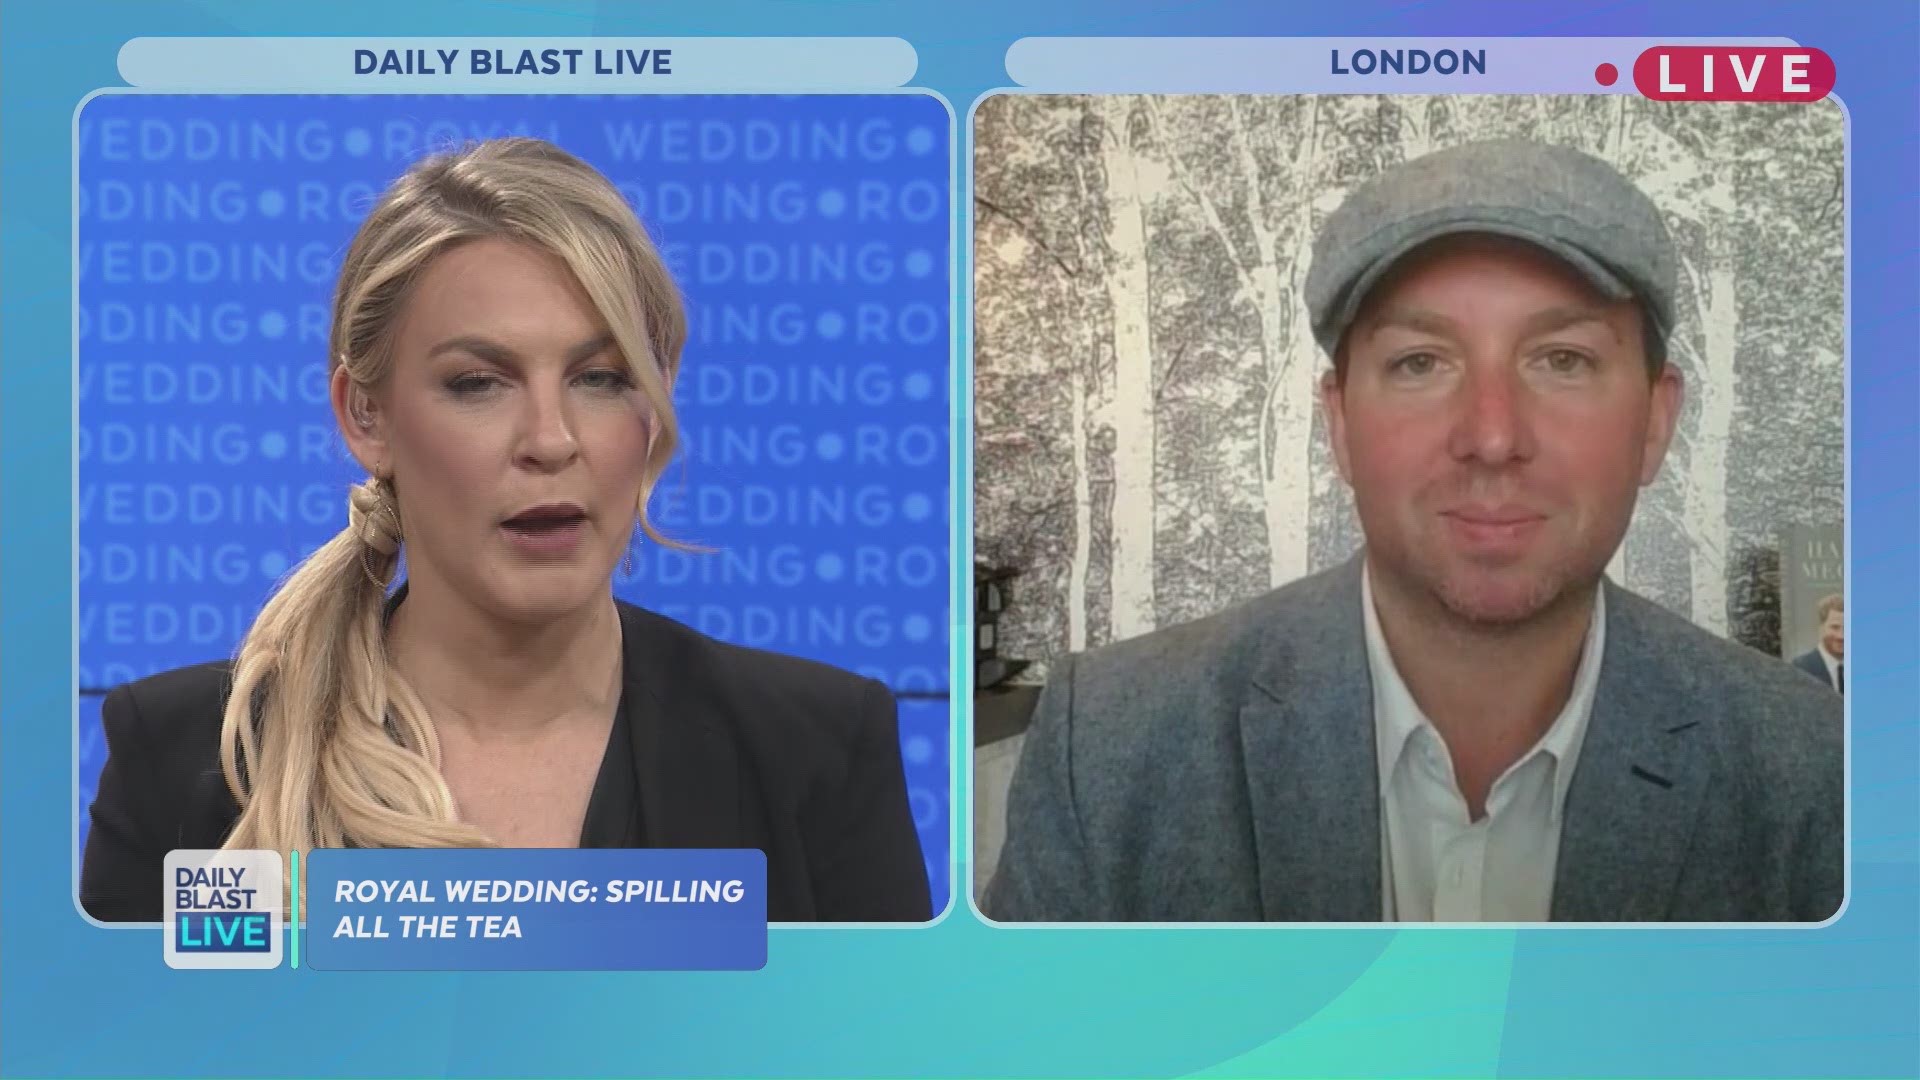 While Meghan and Harry are off to their newlywed duties, Daily Blast LIVE is still not over the royal wedding. Co-host and royal correspondent Tory Shulman spoke with royal expert Thomas J. Mace Archer Mills Esquire to get all the insider details on the b